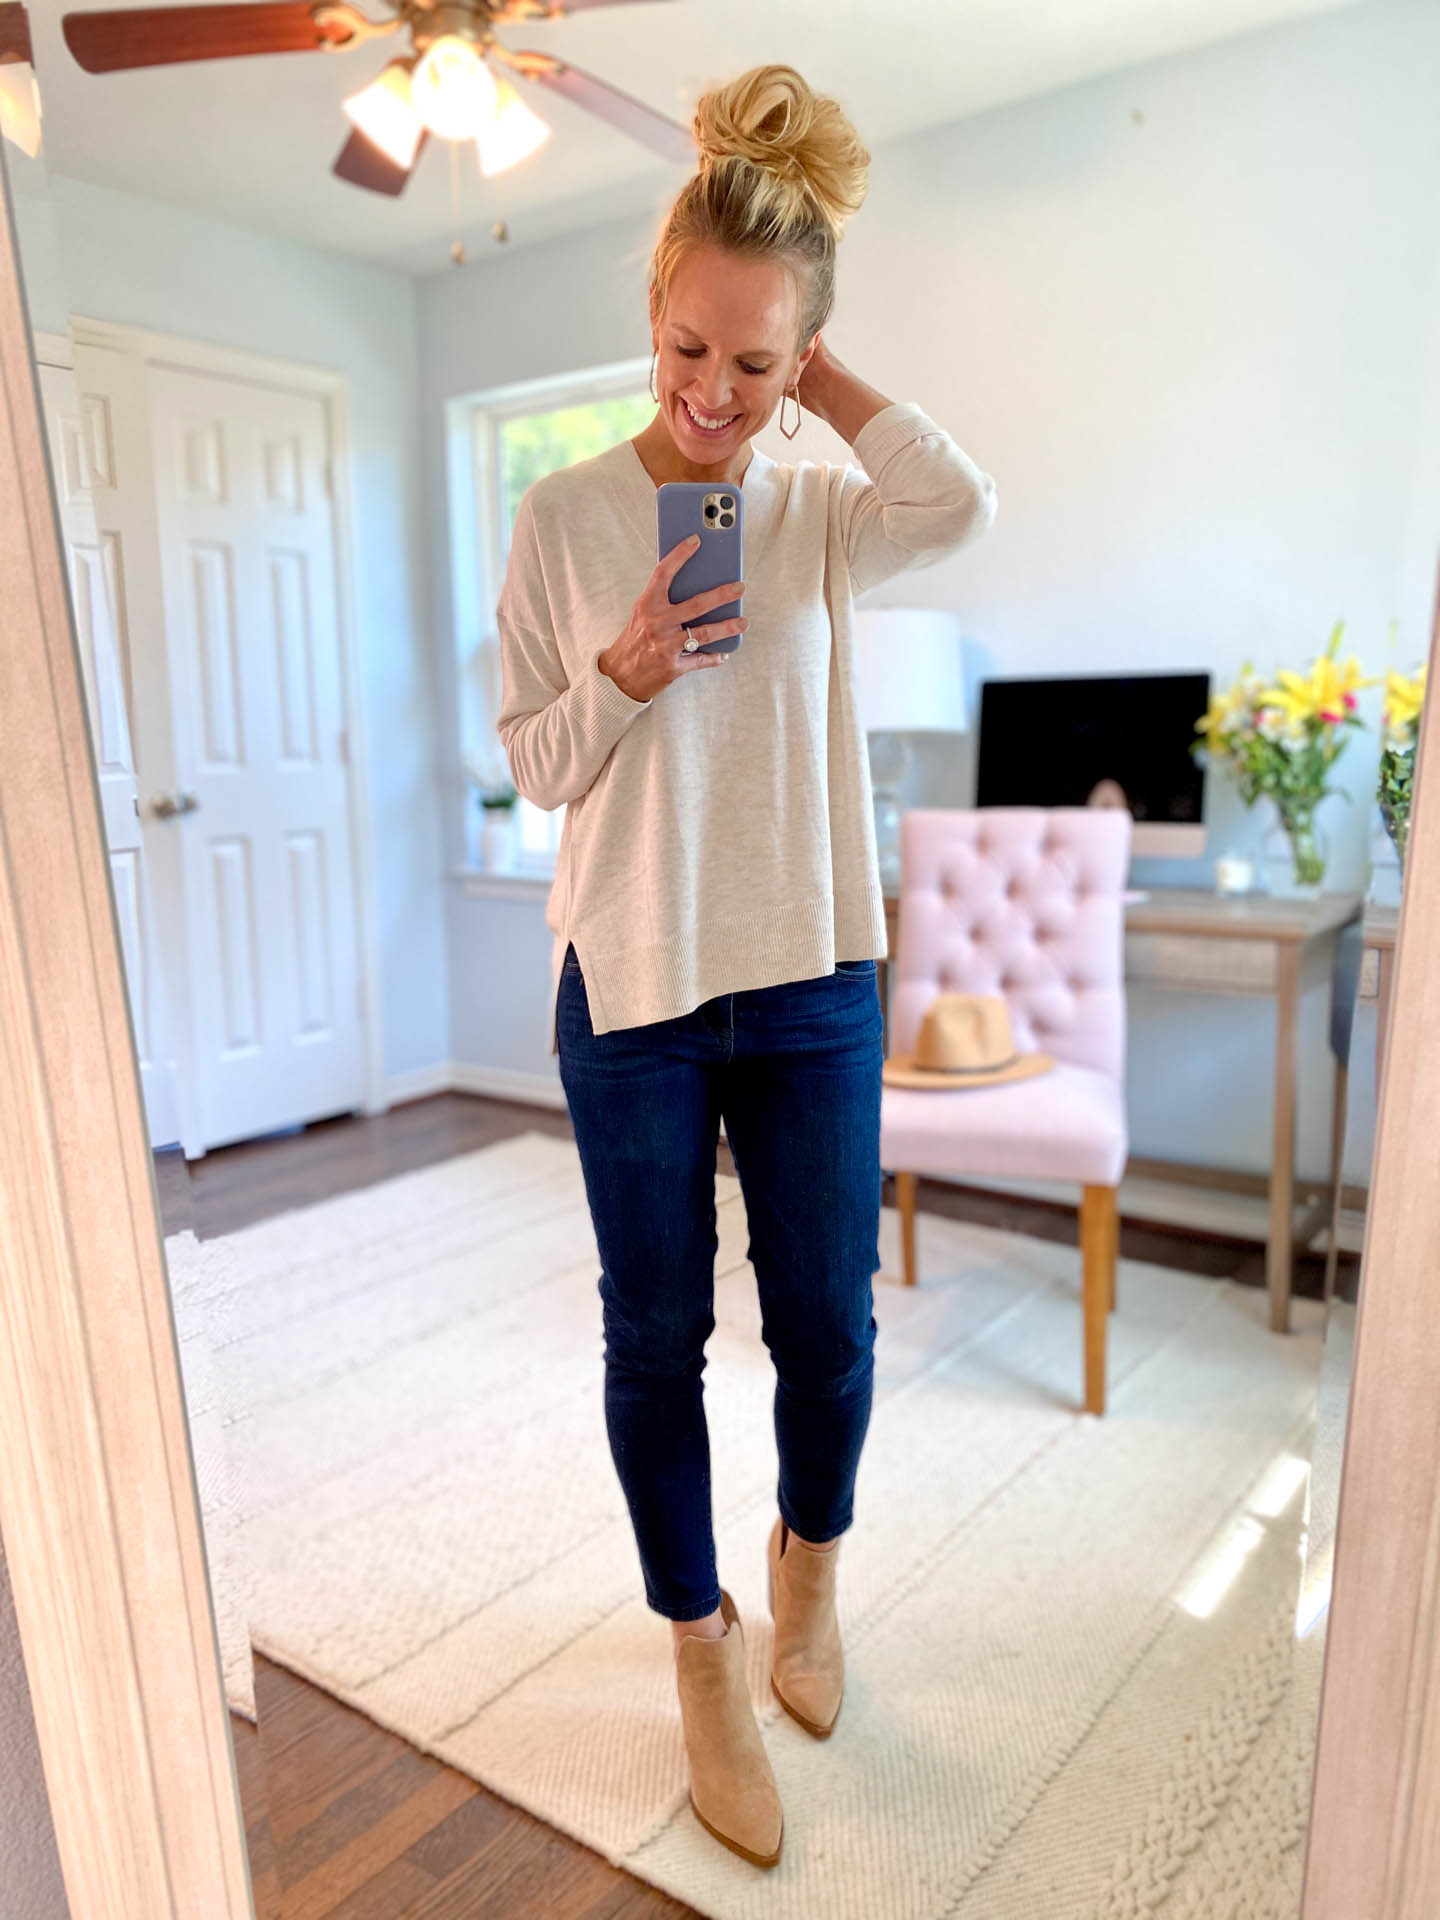 Round-up of Nordstrom Anniversary Sale finds! Fall outfits, athleisure, athletic outfits | Nordstrom Anniversary Sale Guide